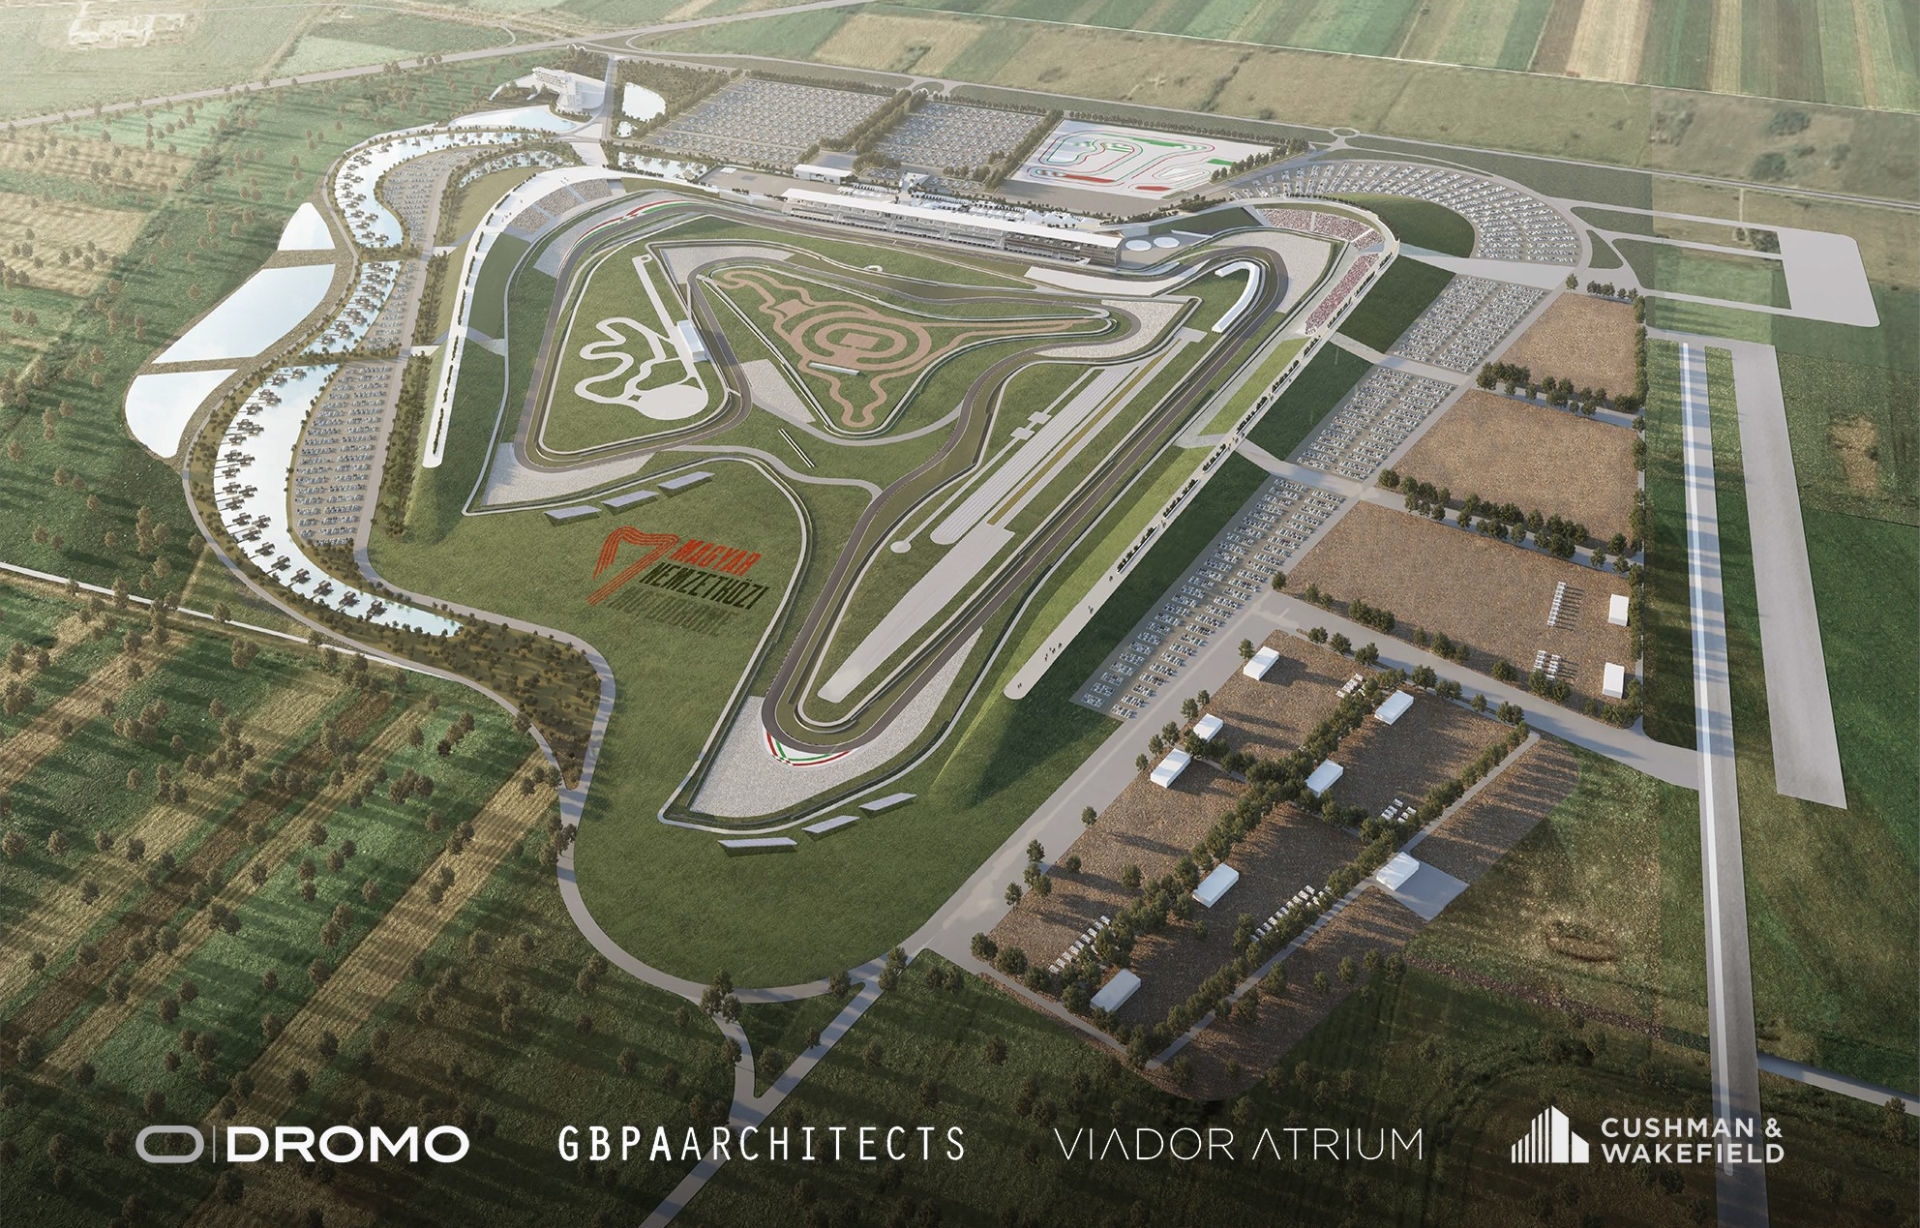 A computer rendering of Dromo's submitted design for the Magyar Nemzetközi Motodrome in Hungary. Image courtesy Dromo.